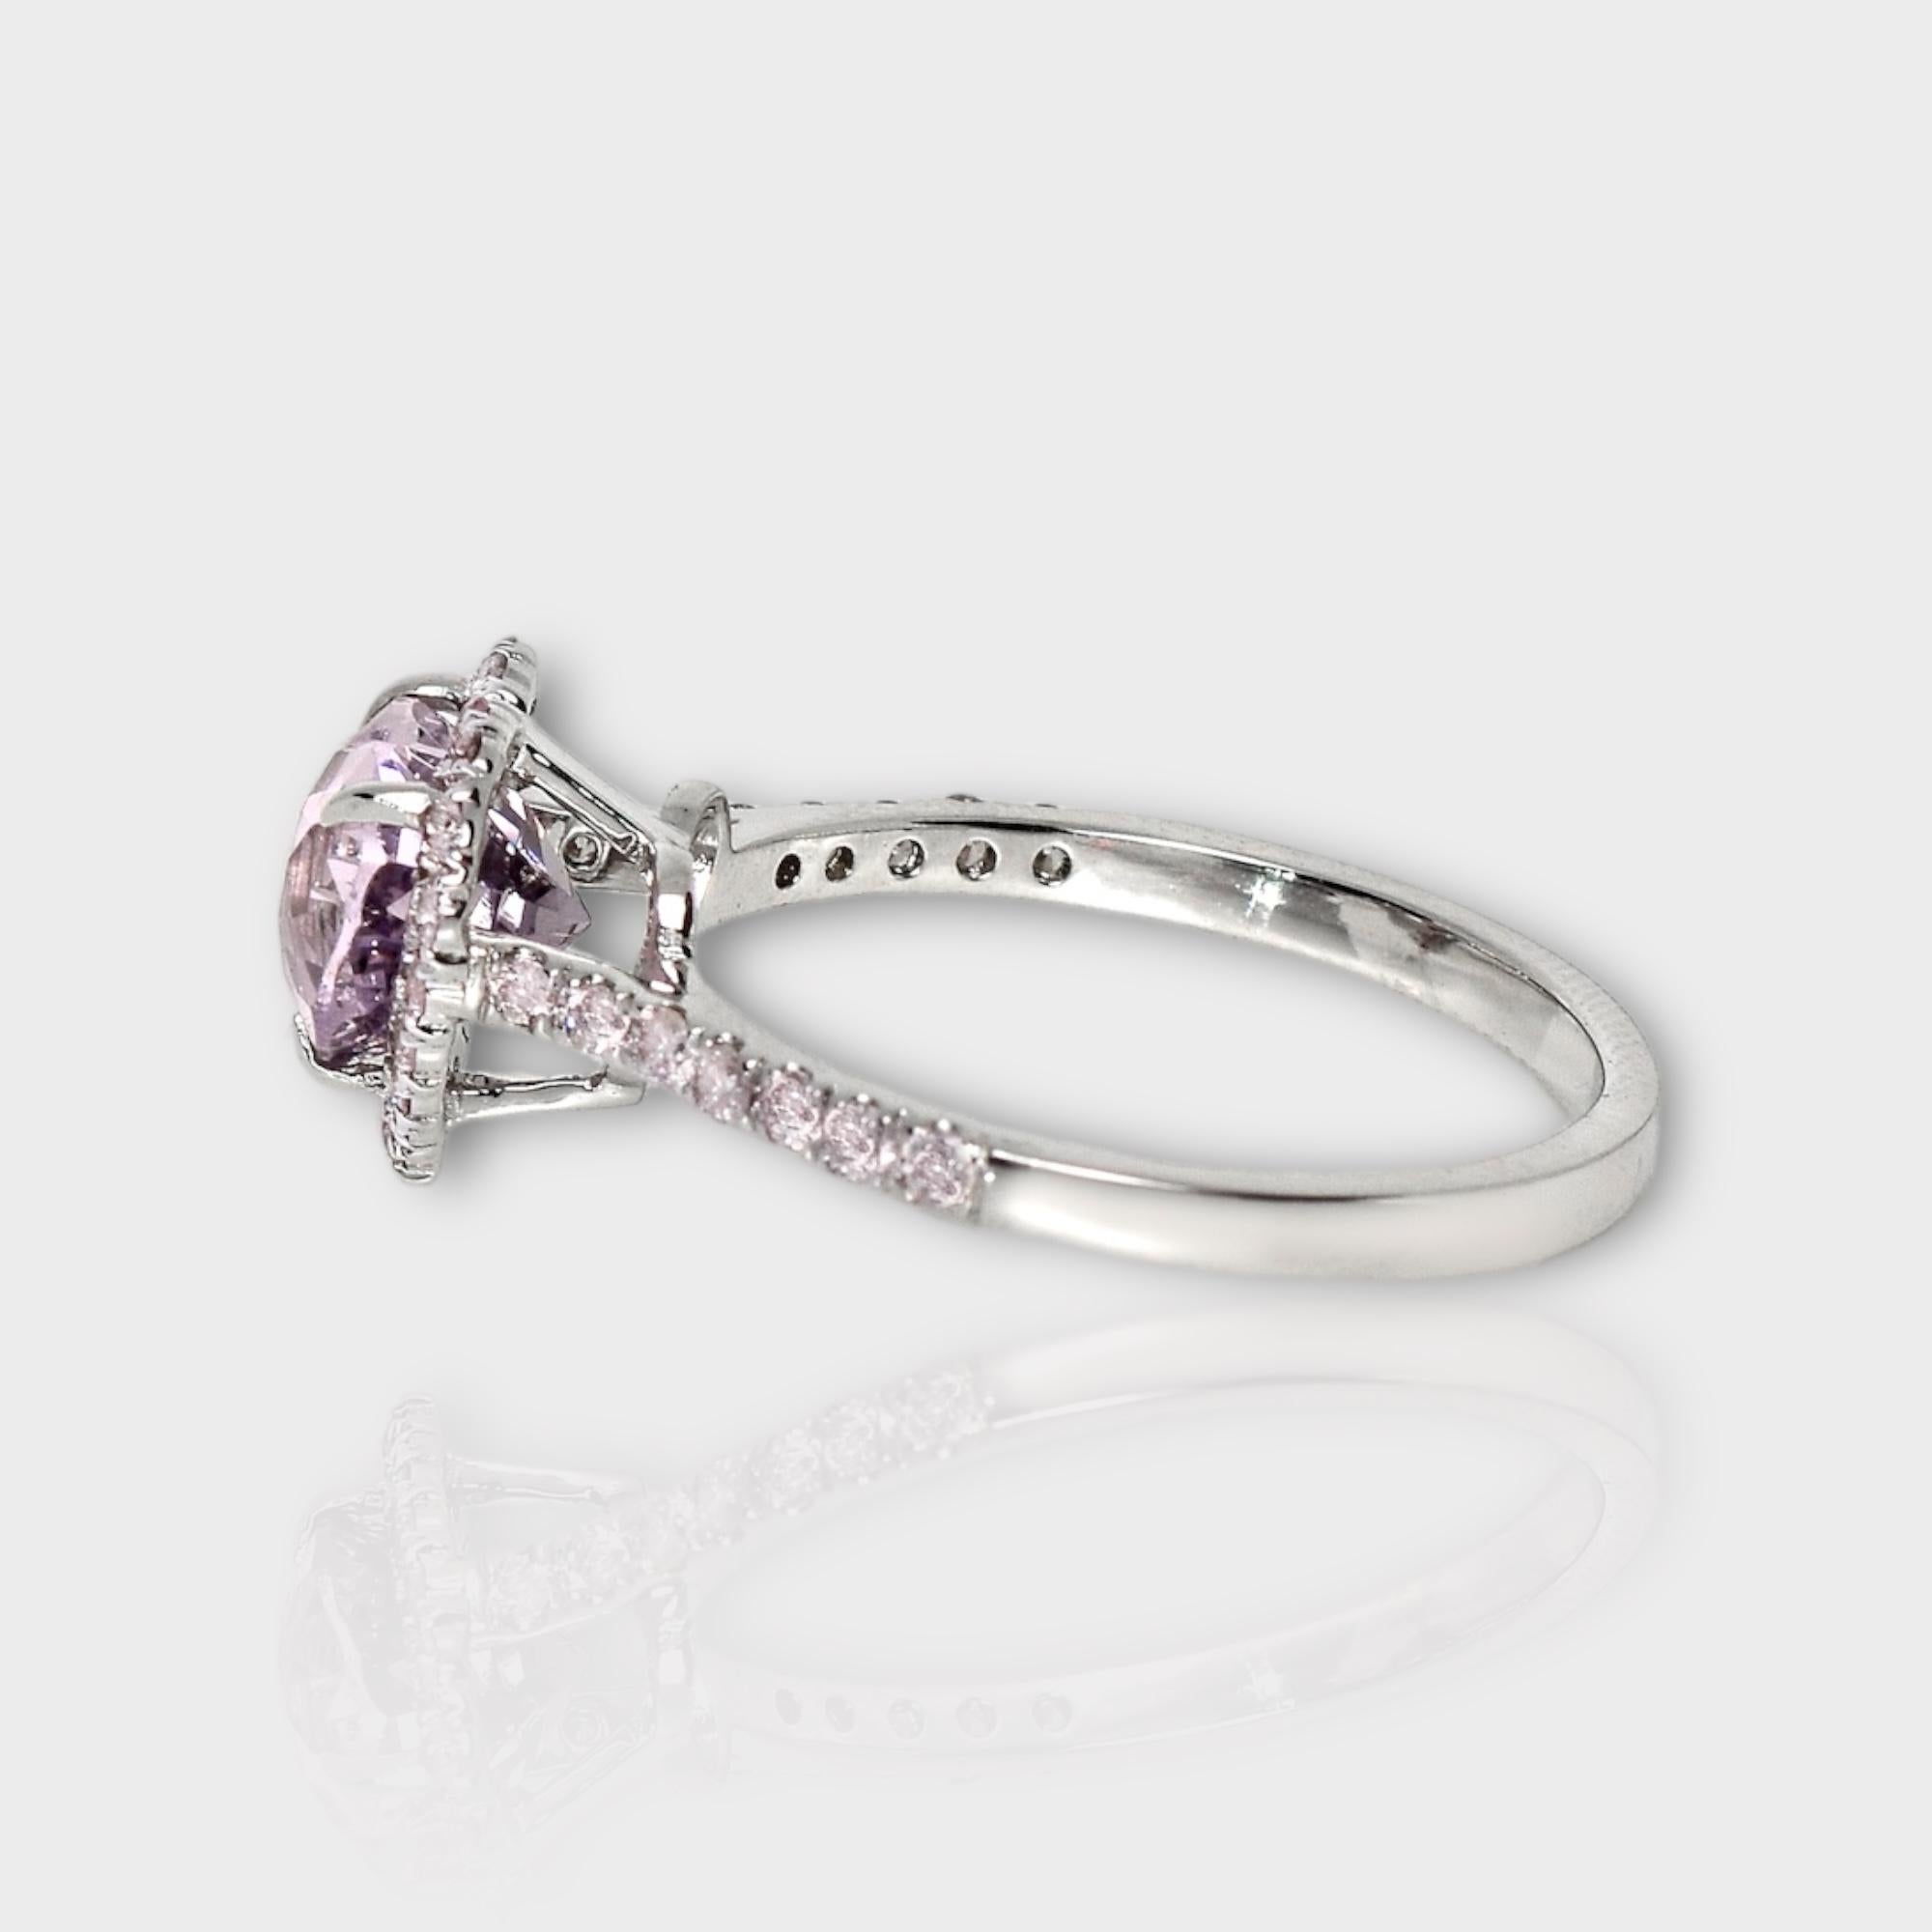 IGI 14K 1.73 Ct Purple Spinel&Pink Diamonds Antique Engagement Ring In New Condition For Sale In Kaohsiung City, TW